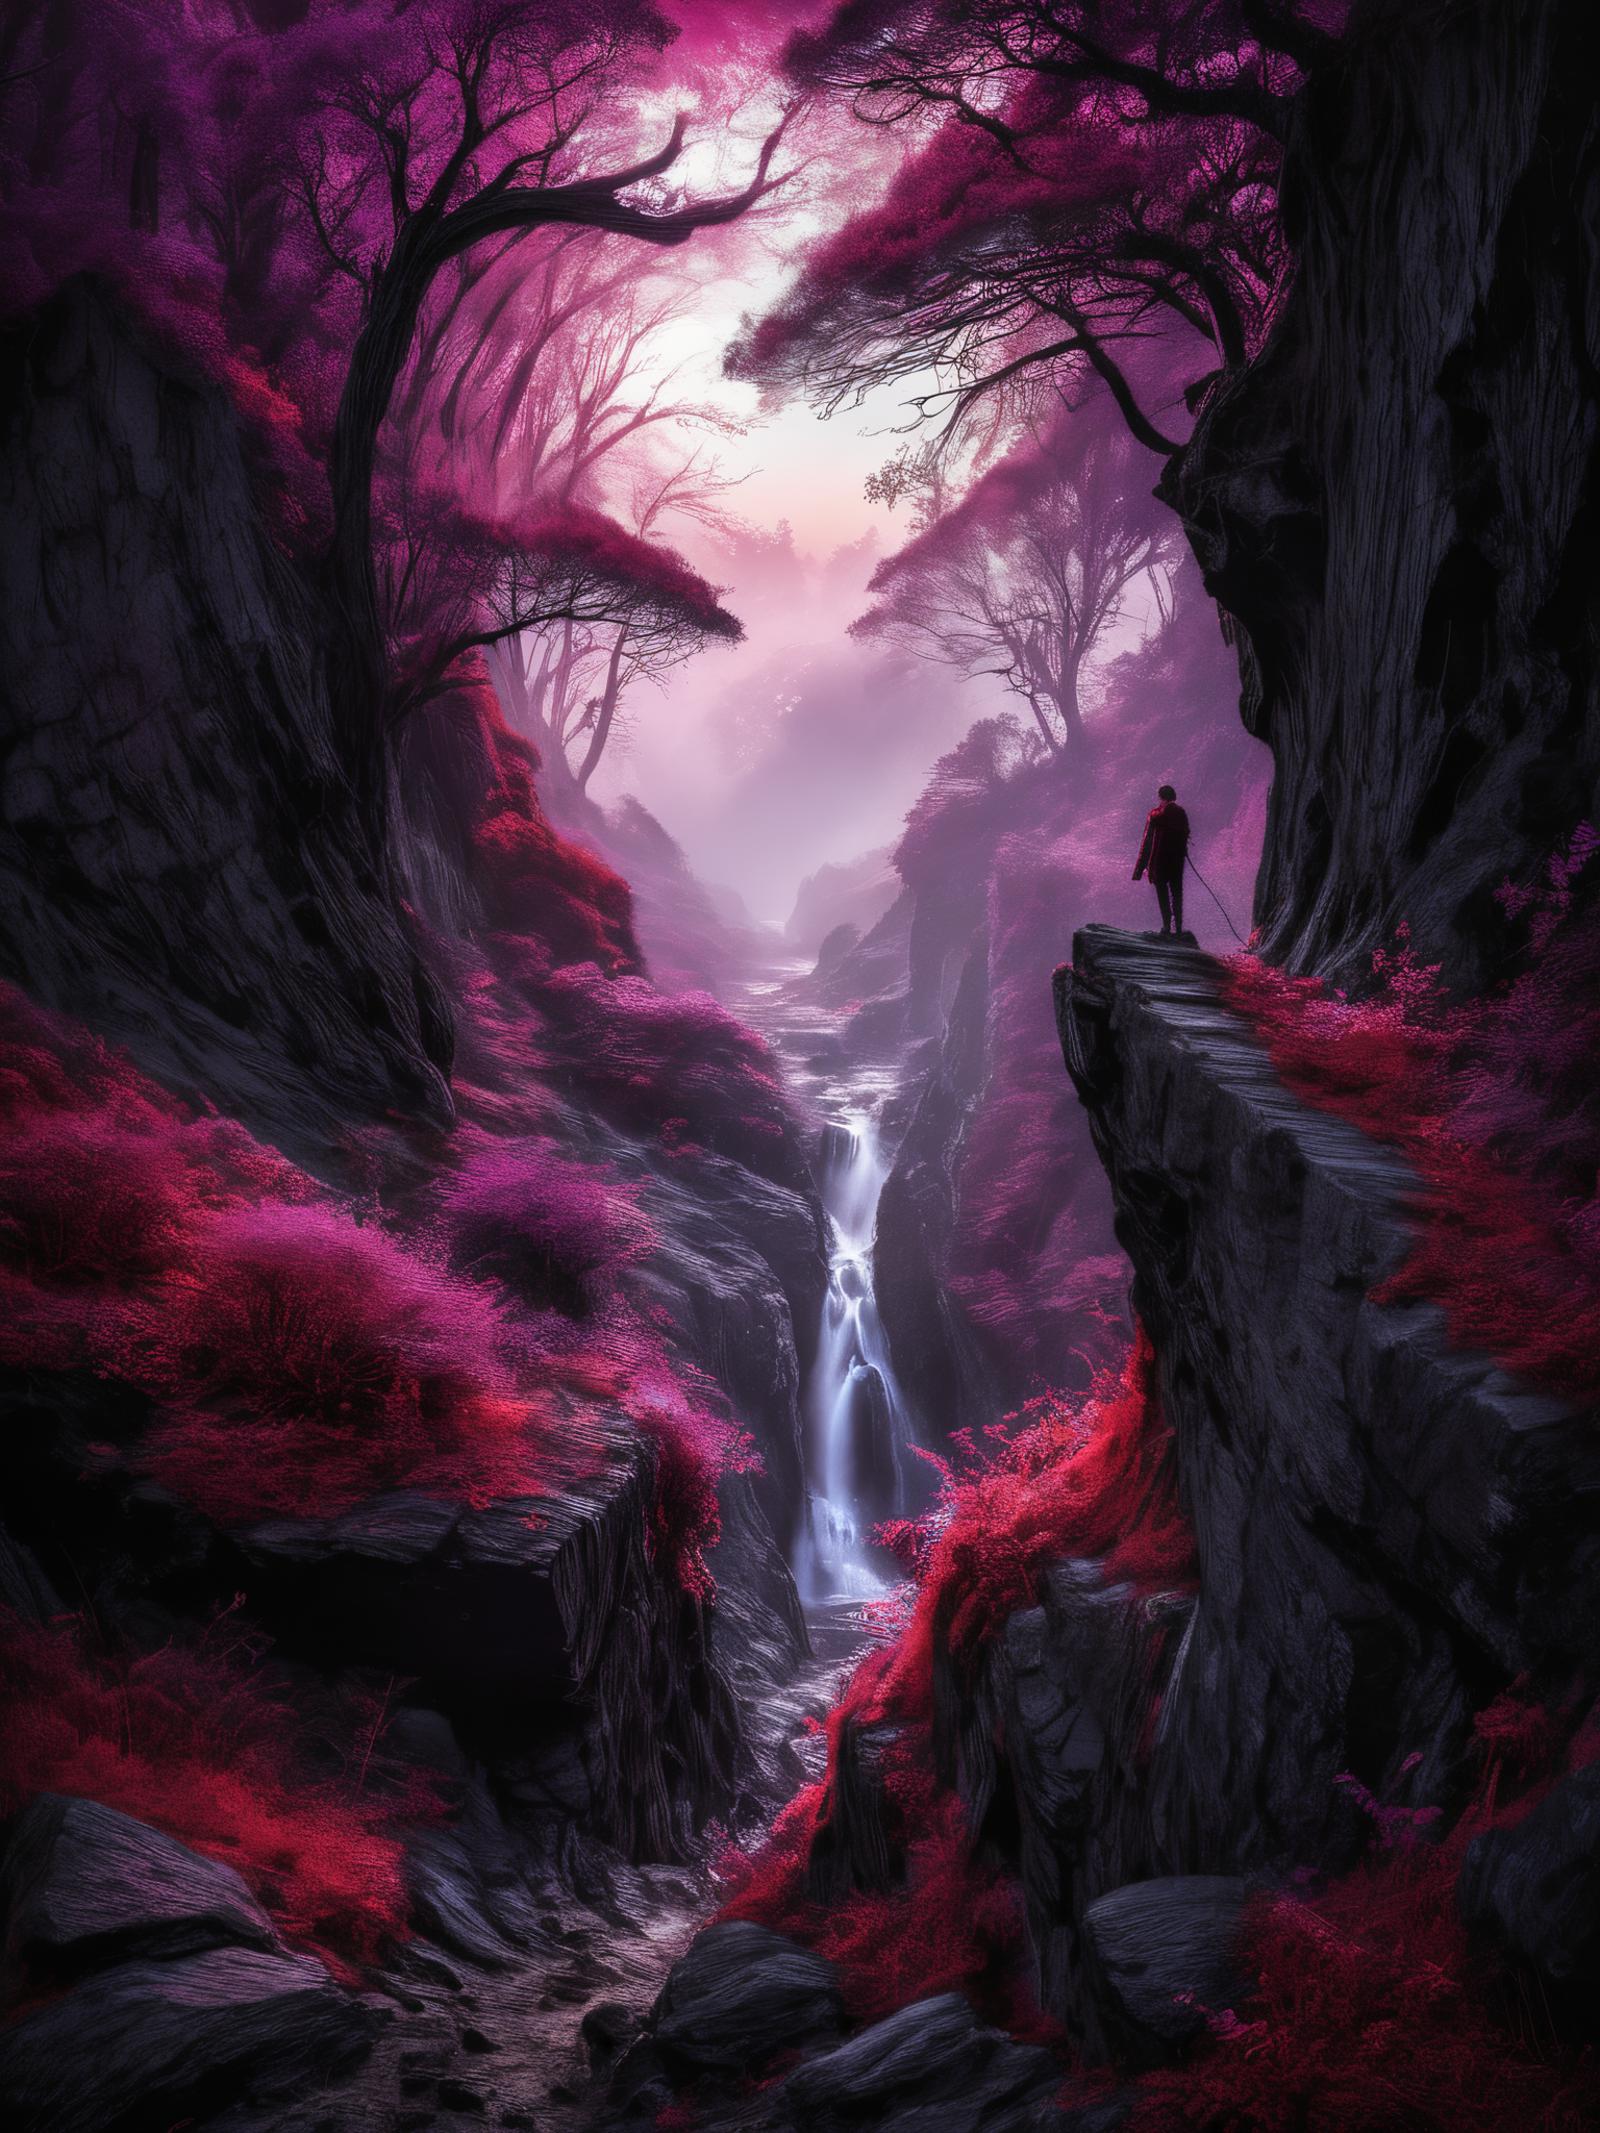 A person standing on a bridge over a waterfall with a purple and pink landscape.